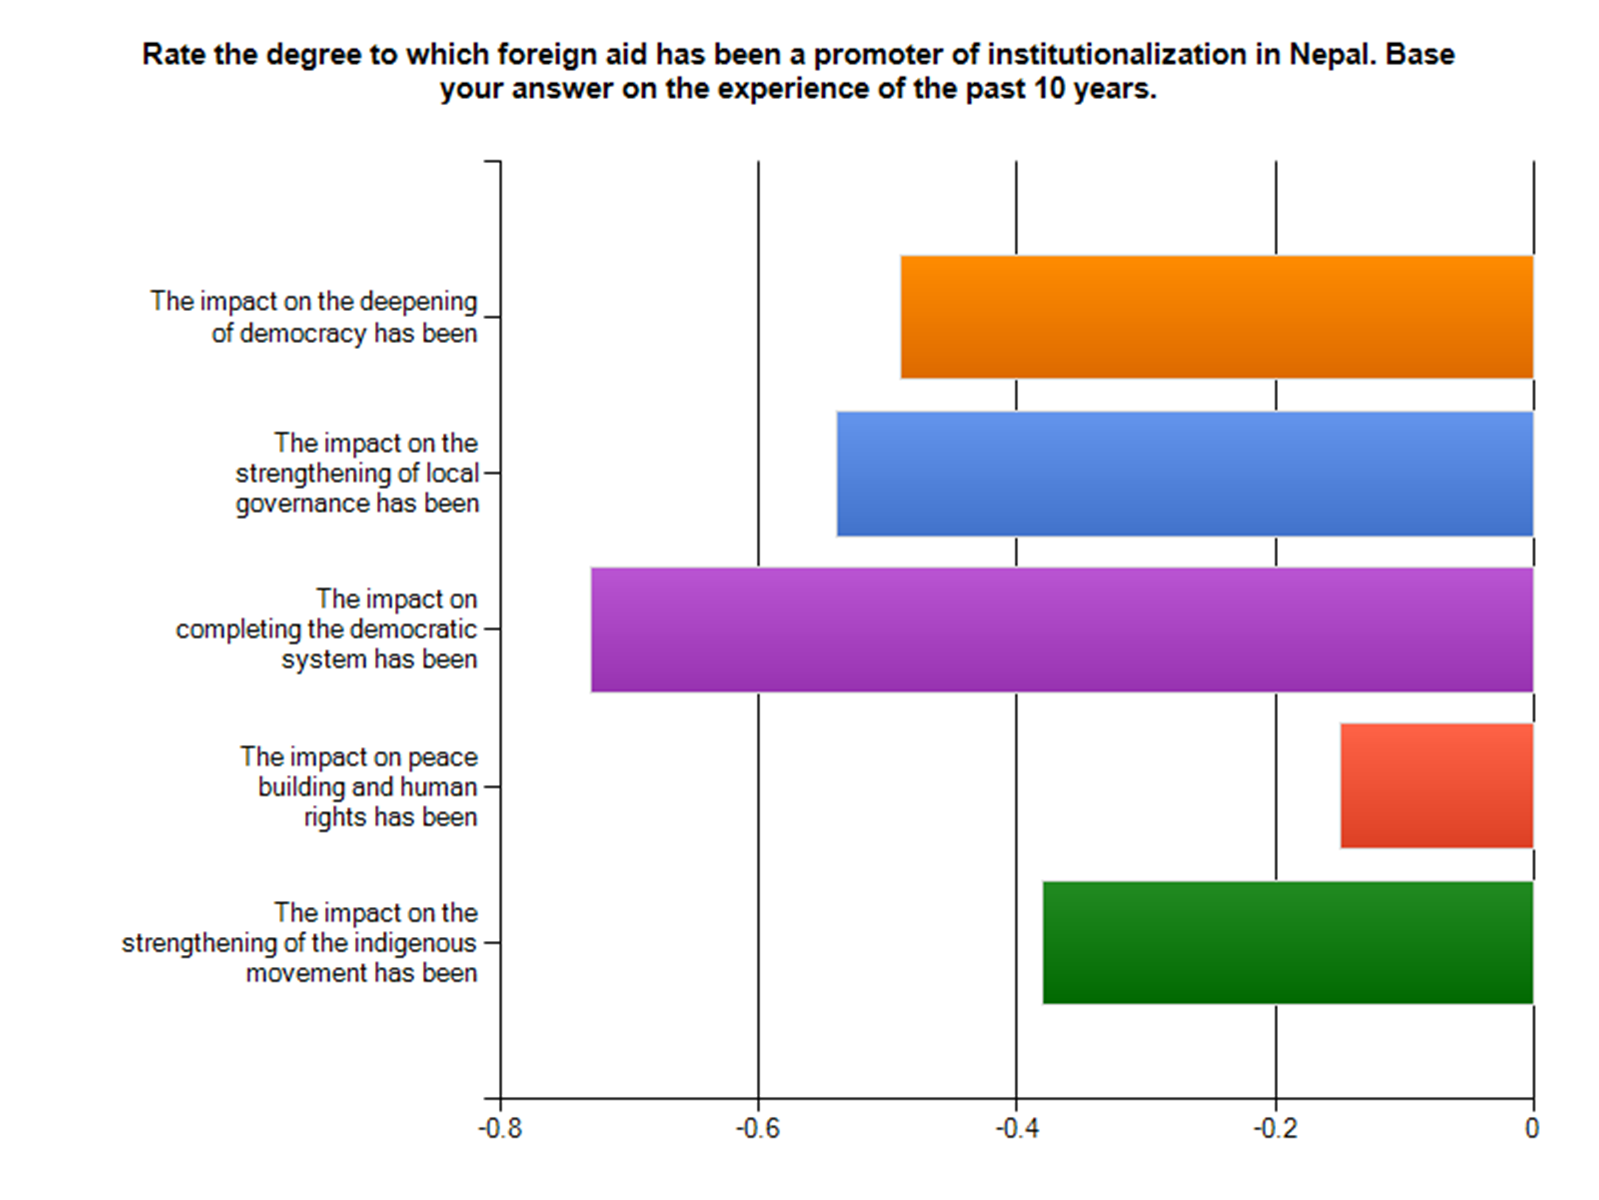 Figure 3: Foreign aid as a promoter of institutionalization (average values of the responses).